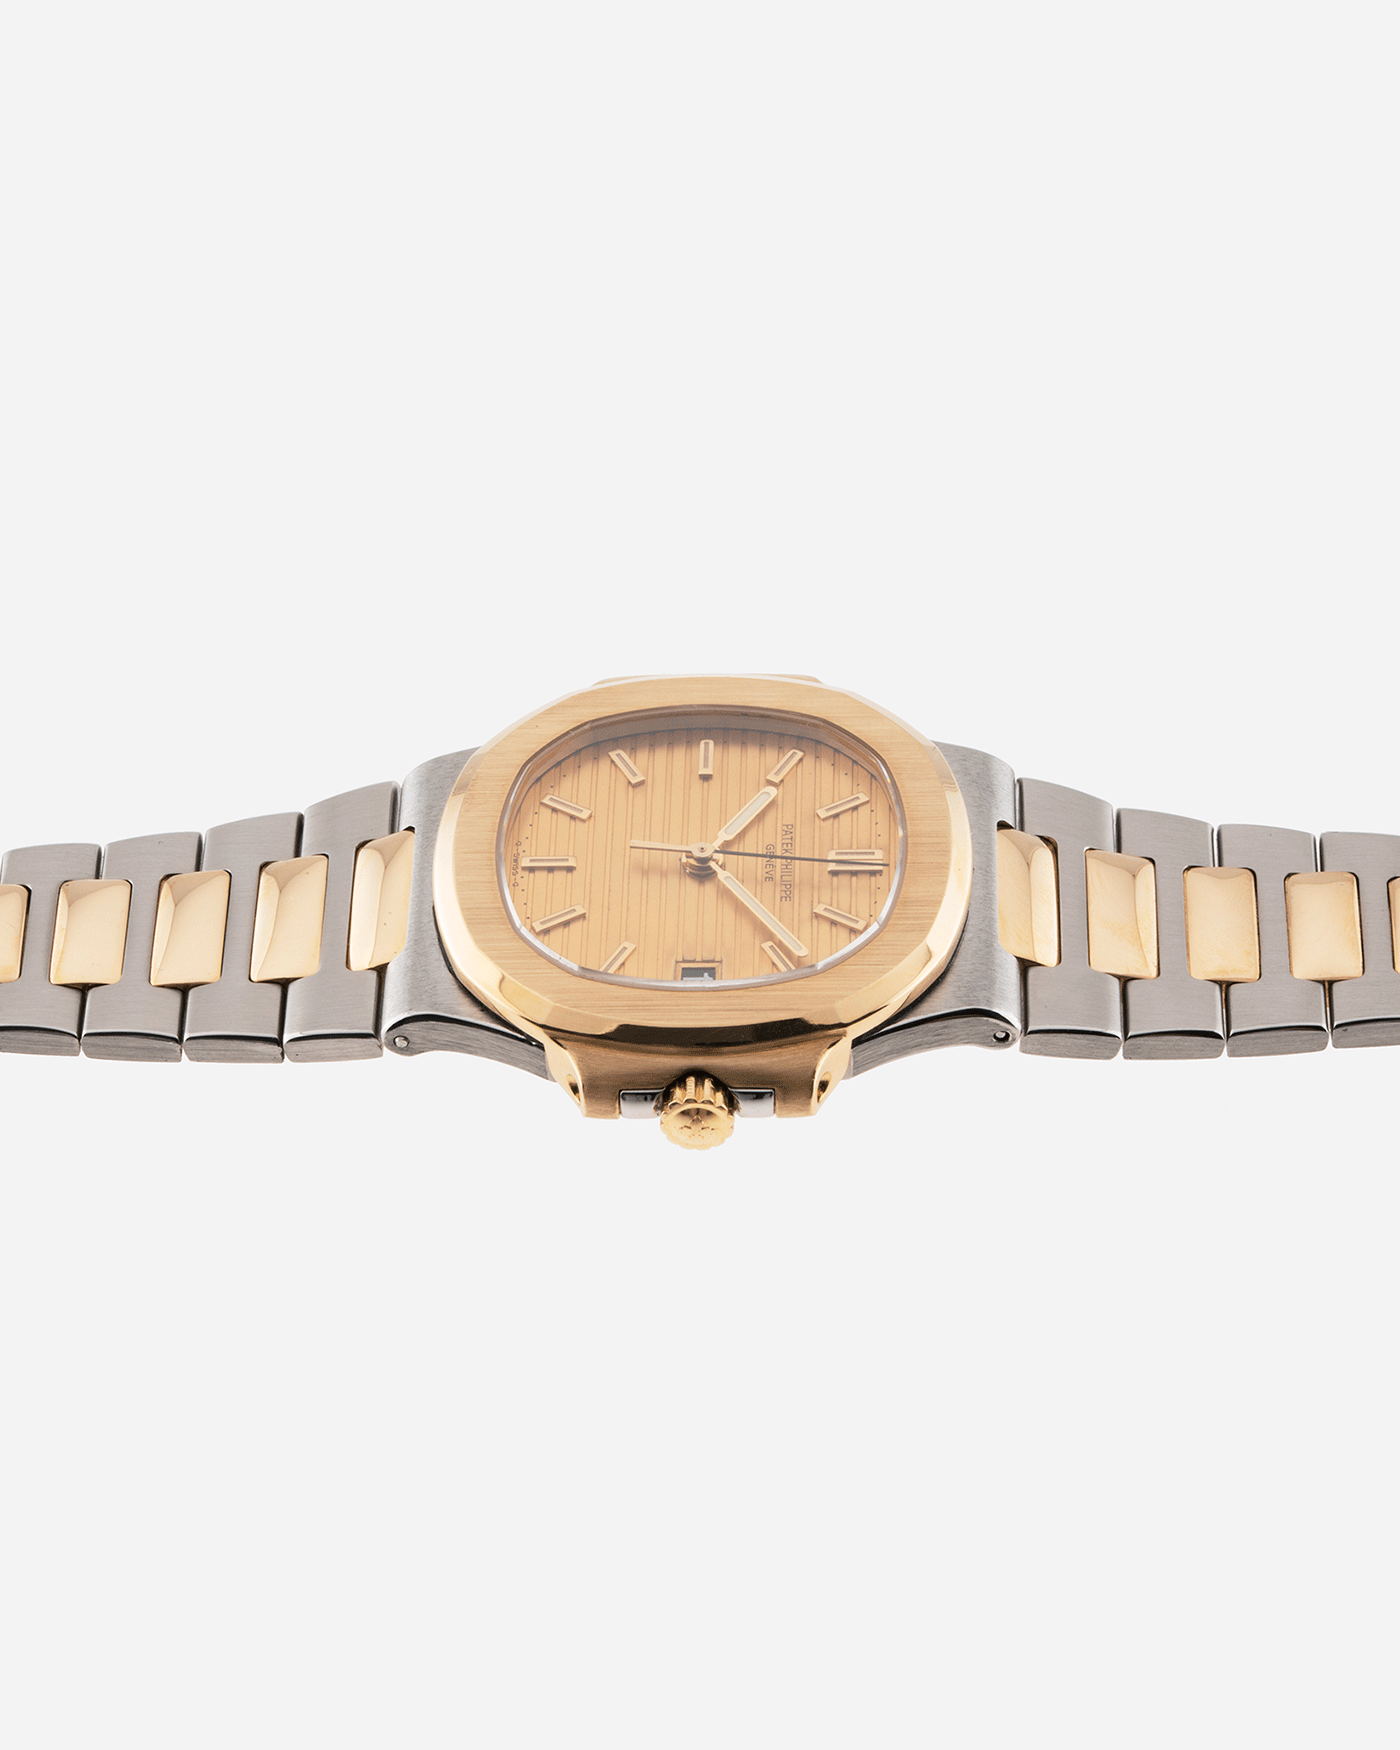 Brand: Patek Philippe Year: 1980’s Model: Nautilus Reference Number: 3800 Material: Stainless Steel and 18k Yellow Gold Movement: Calibre 335 SC Case Diameter: 38mm Bracelet: Patek Philippe Integrated Stainless Steel and 18k Yellow Gold Bracelet